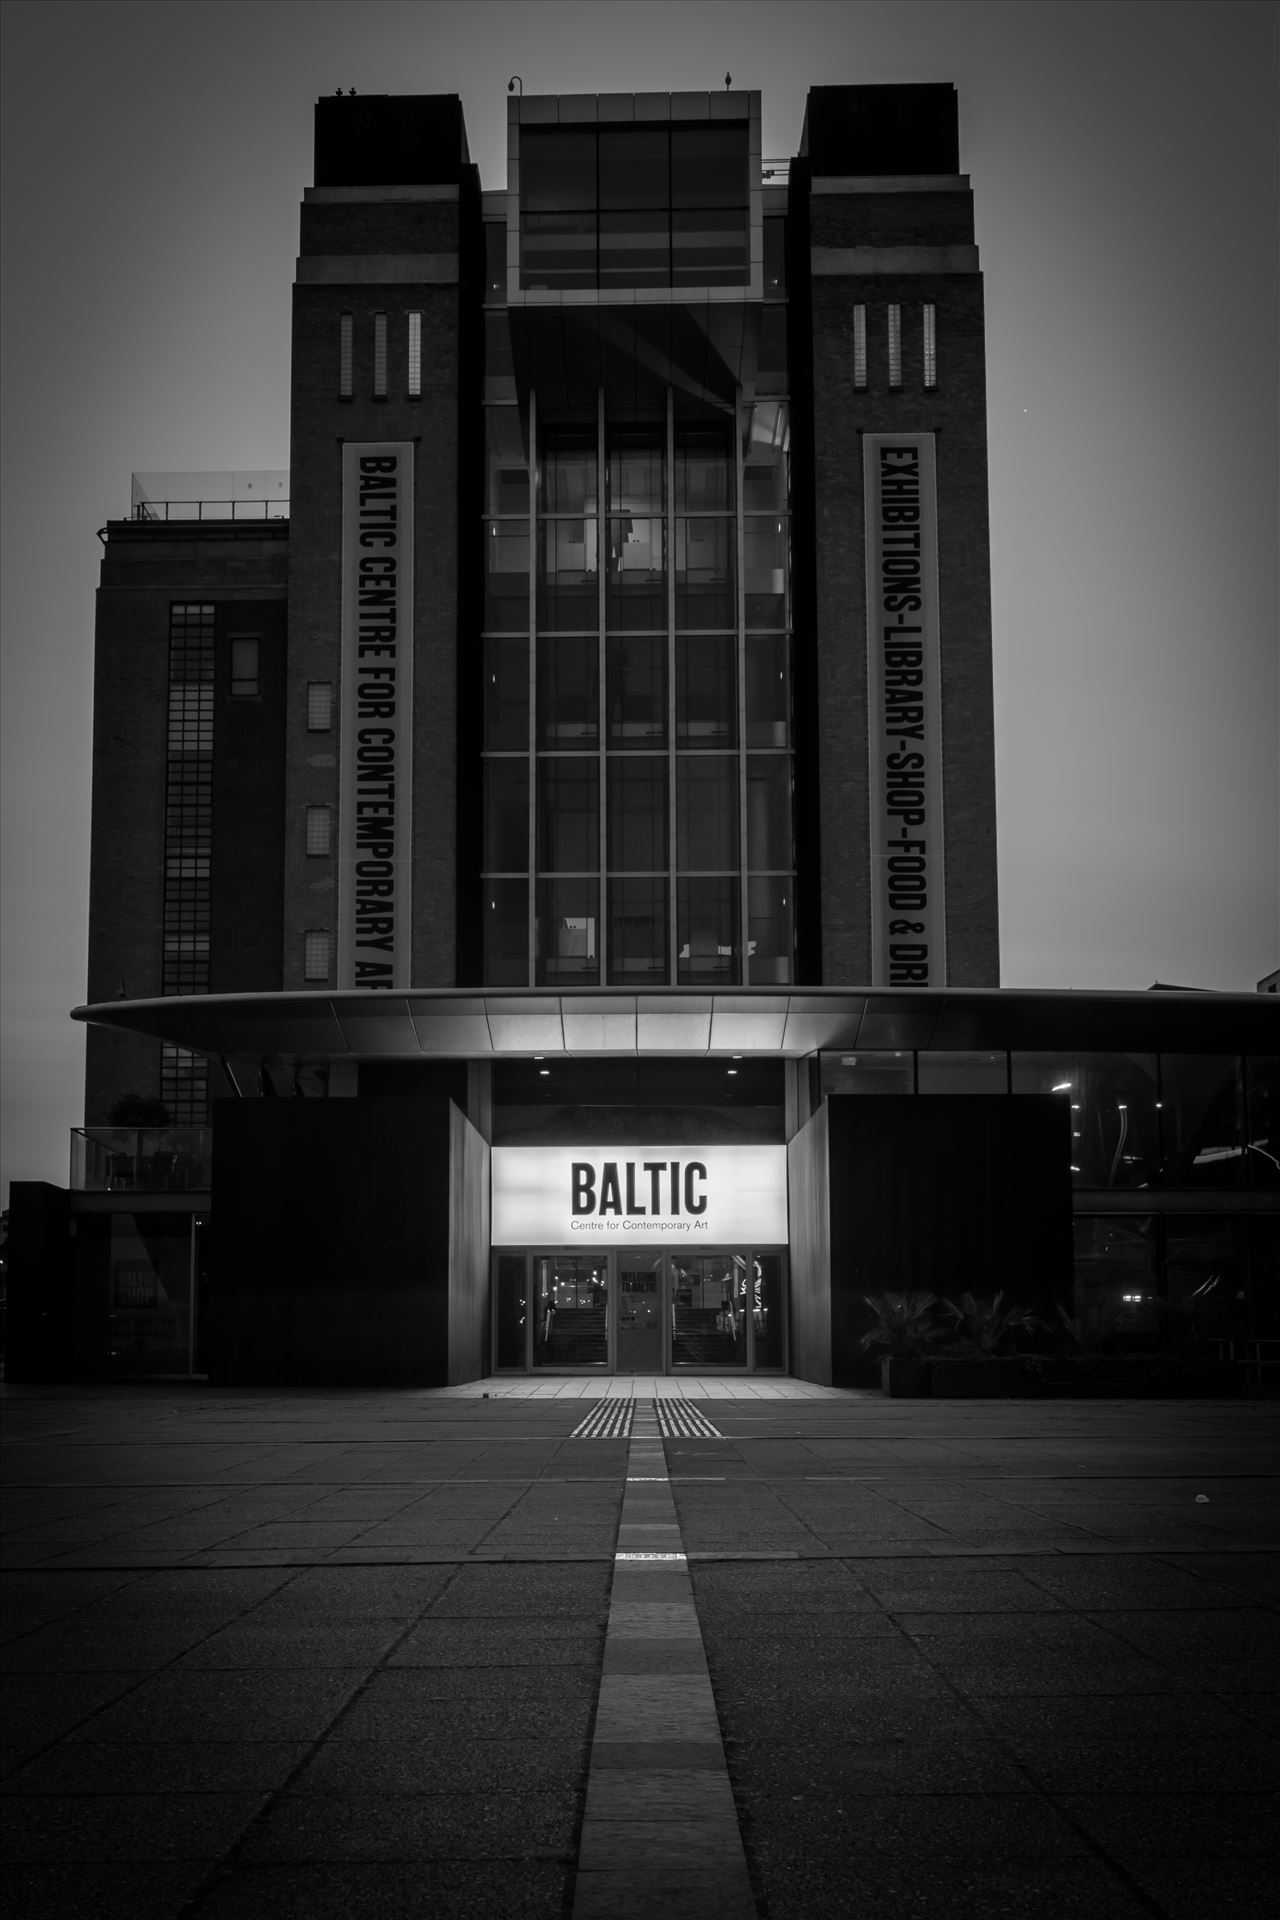 The Baltic arts centre - The Baltic centre for contemporary arts was opened in 2002 & is housed in a converted flour mill that was originally opened in 1950 by Rank Hovis. by philreay